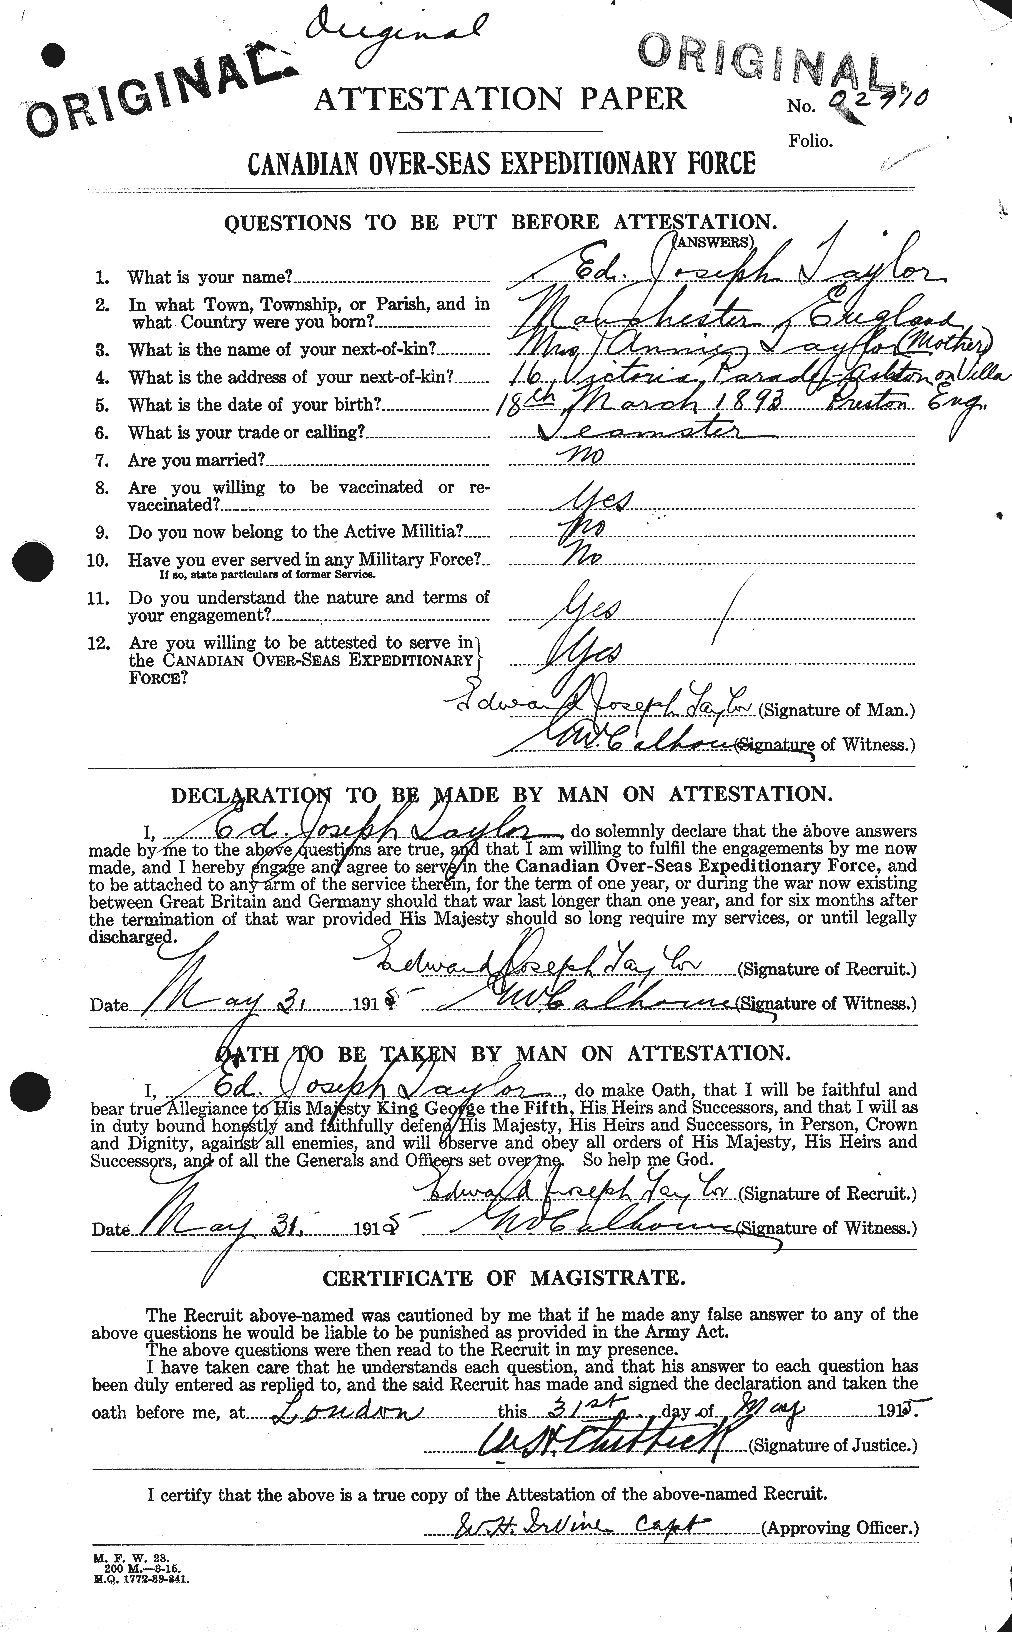 Personnel Records of the First World War - CEF 627321a